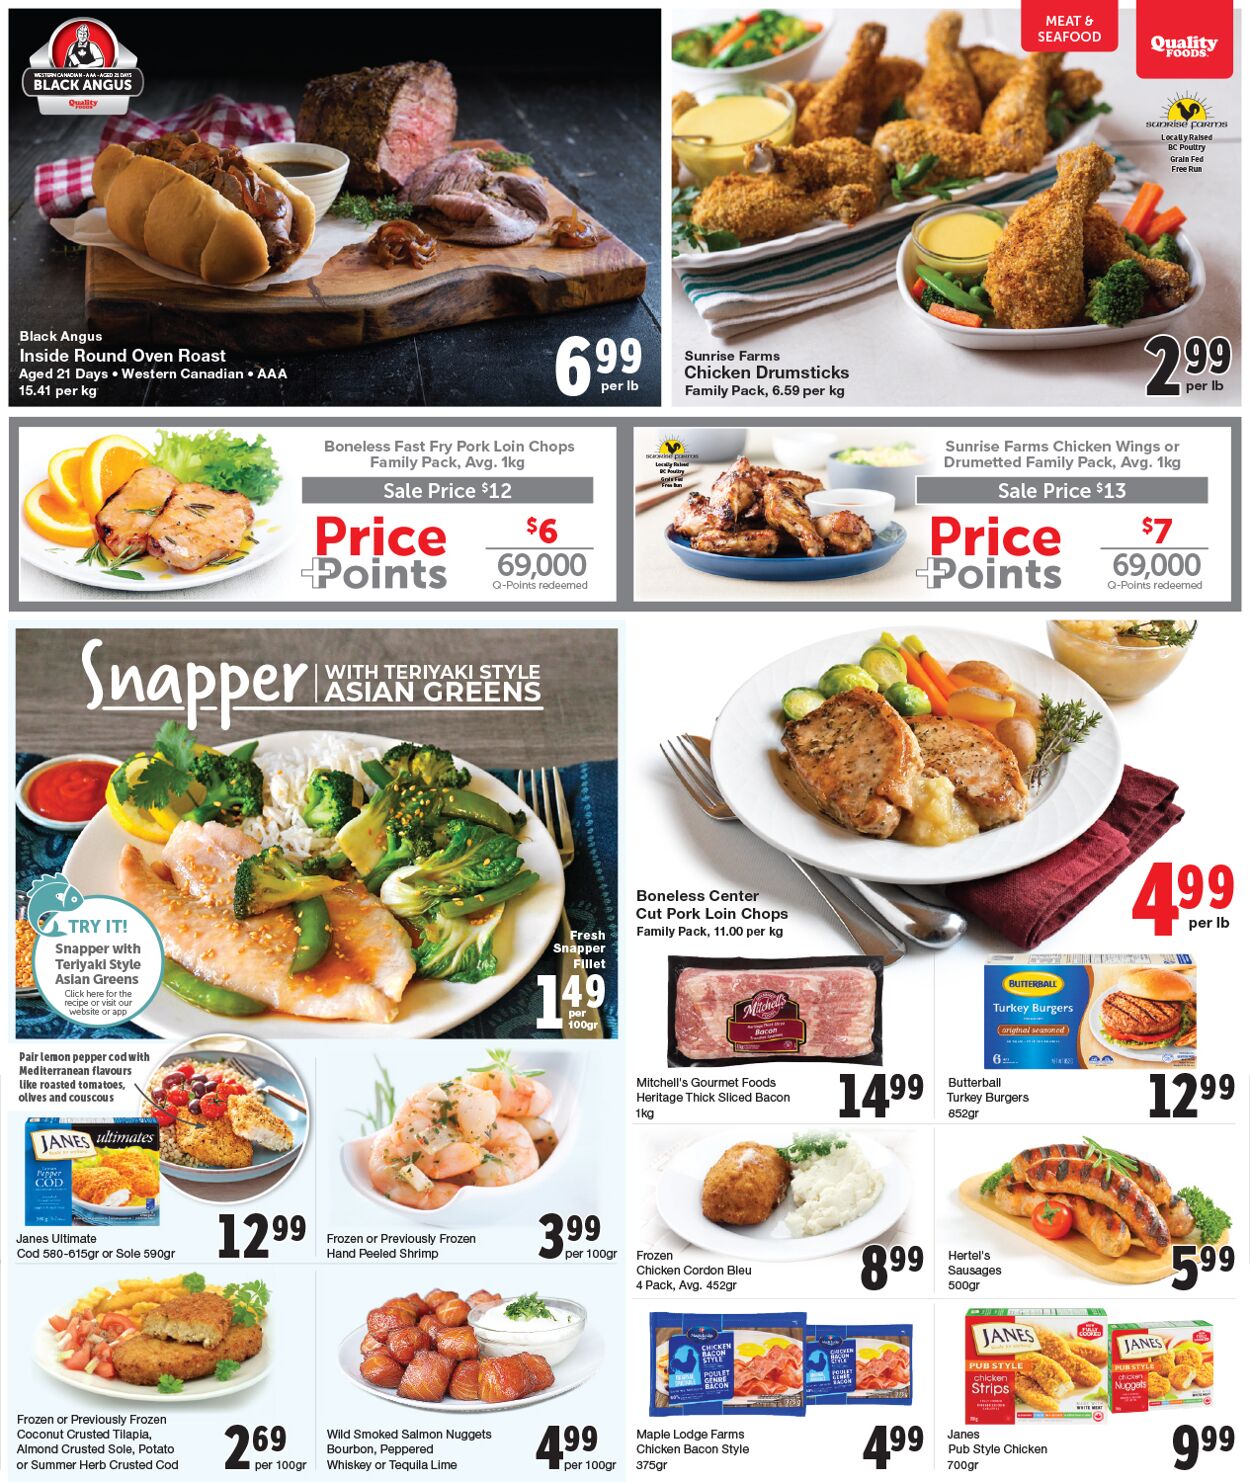 Flyer Quality Foods 24.10.2022 - 30.10.2022